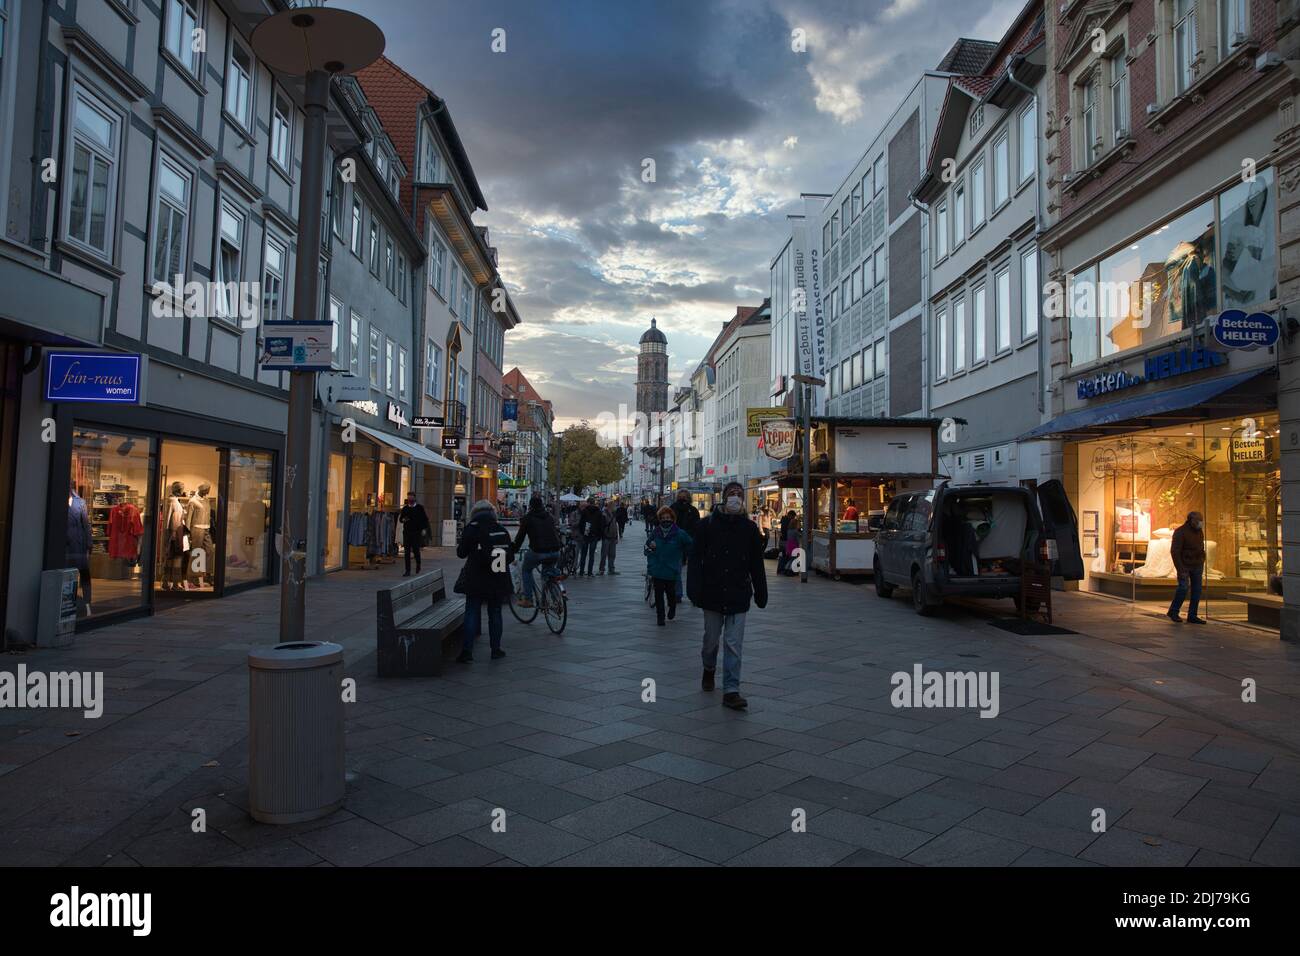 Göttingen Germany. Autumn, 2020. Pedestrian shopping zone with illuminated stores and scenic cloudscape in vanishing point. Stock Photo